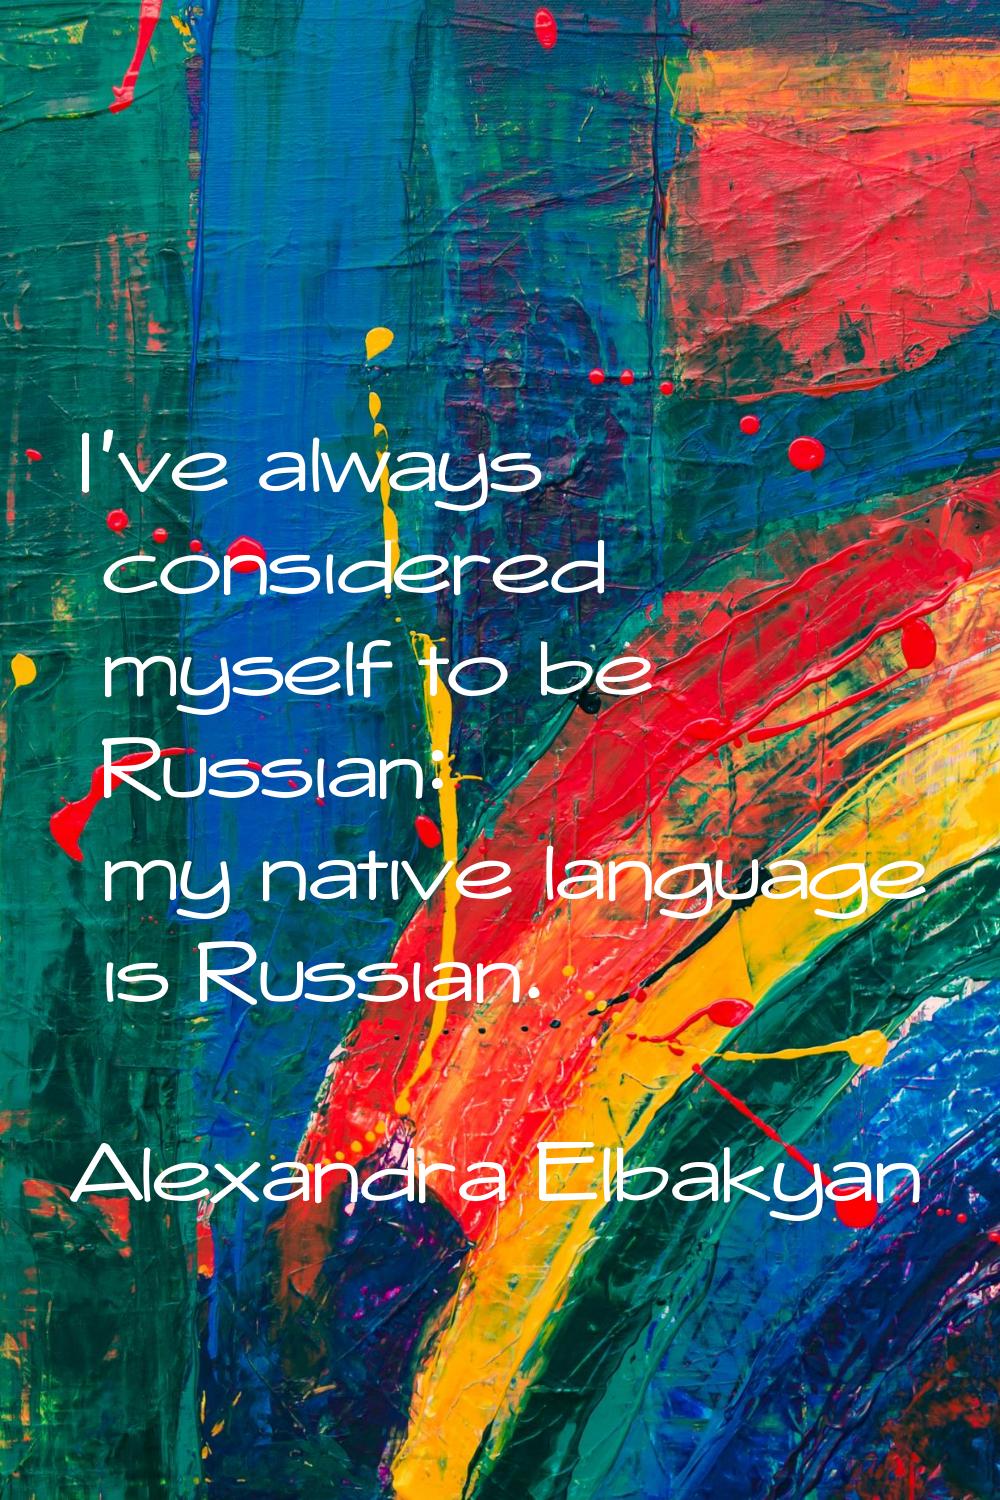 I've always considered myself to be Russian: my native language is Russian.